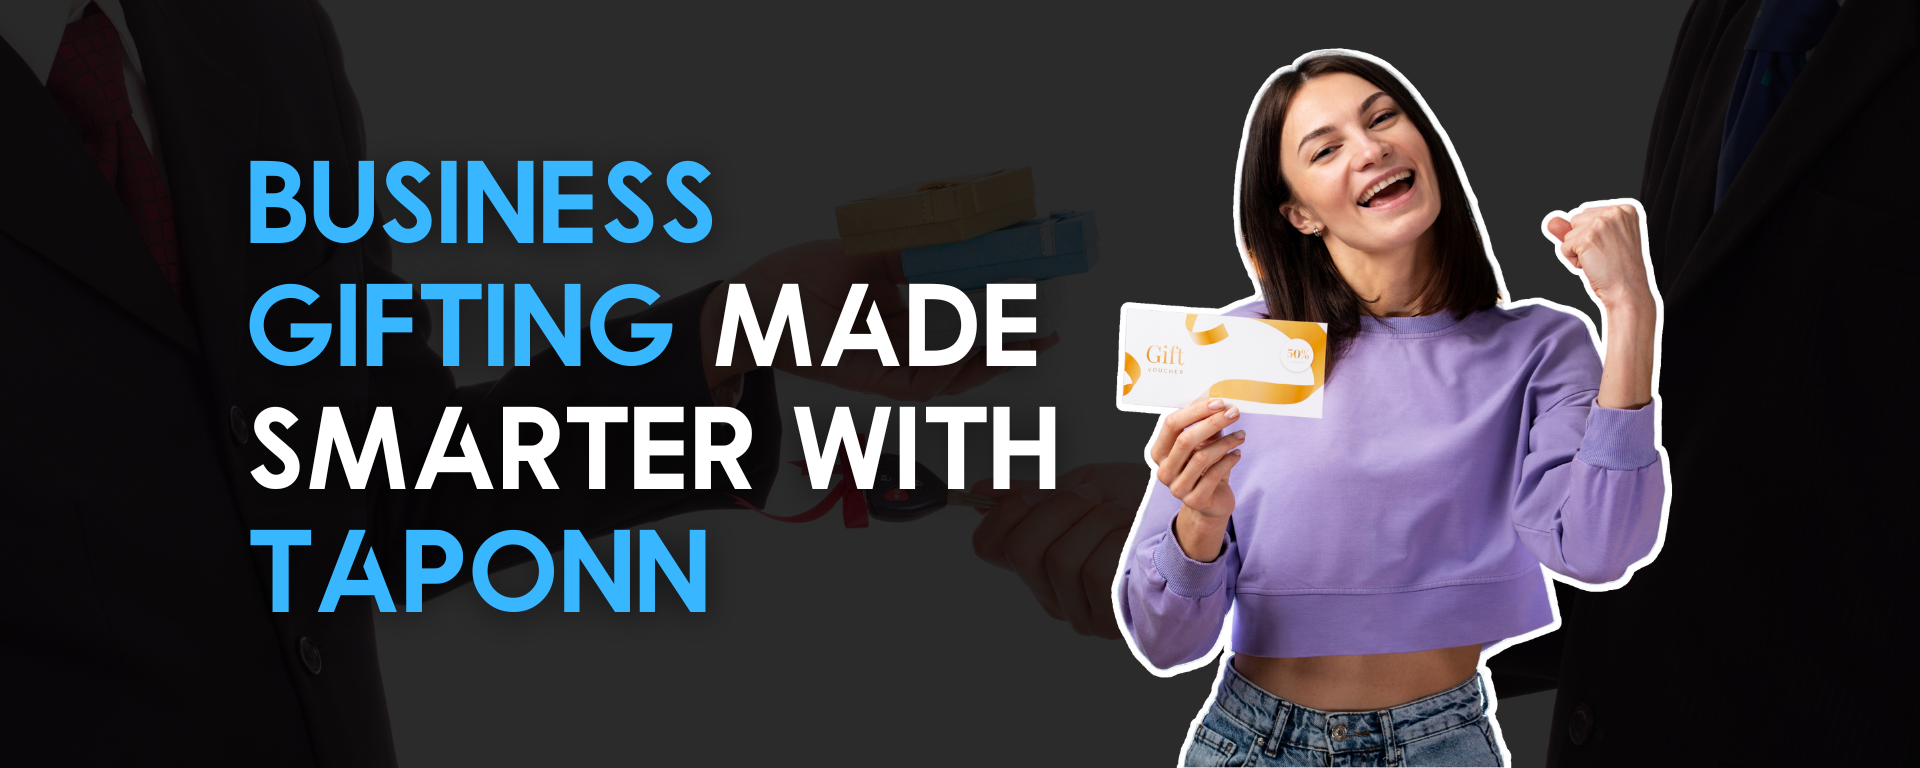 Business Gifting Made Smarter With TapOnn!